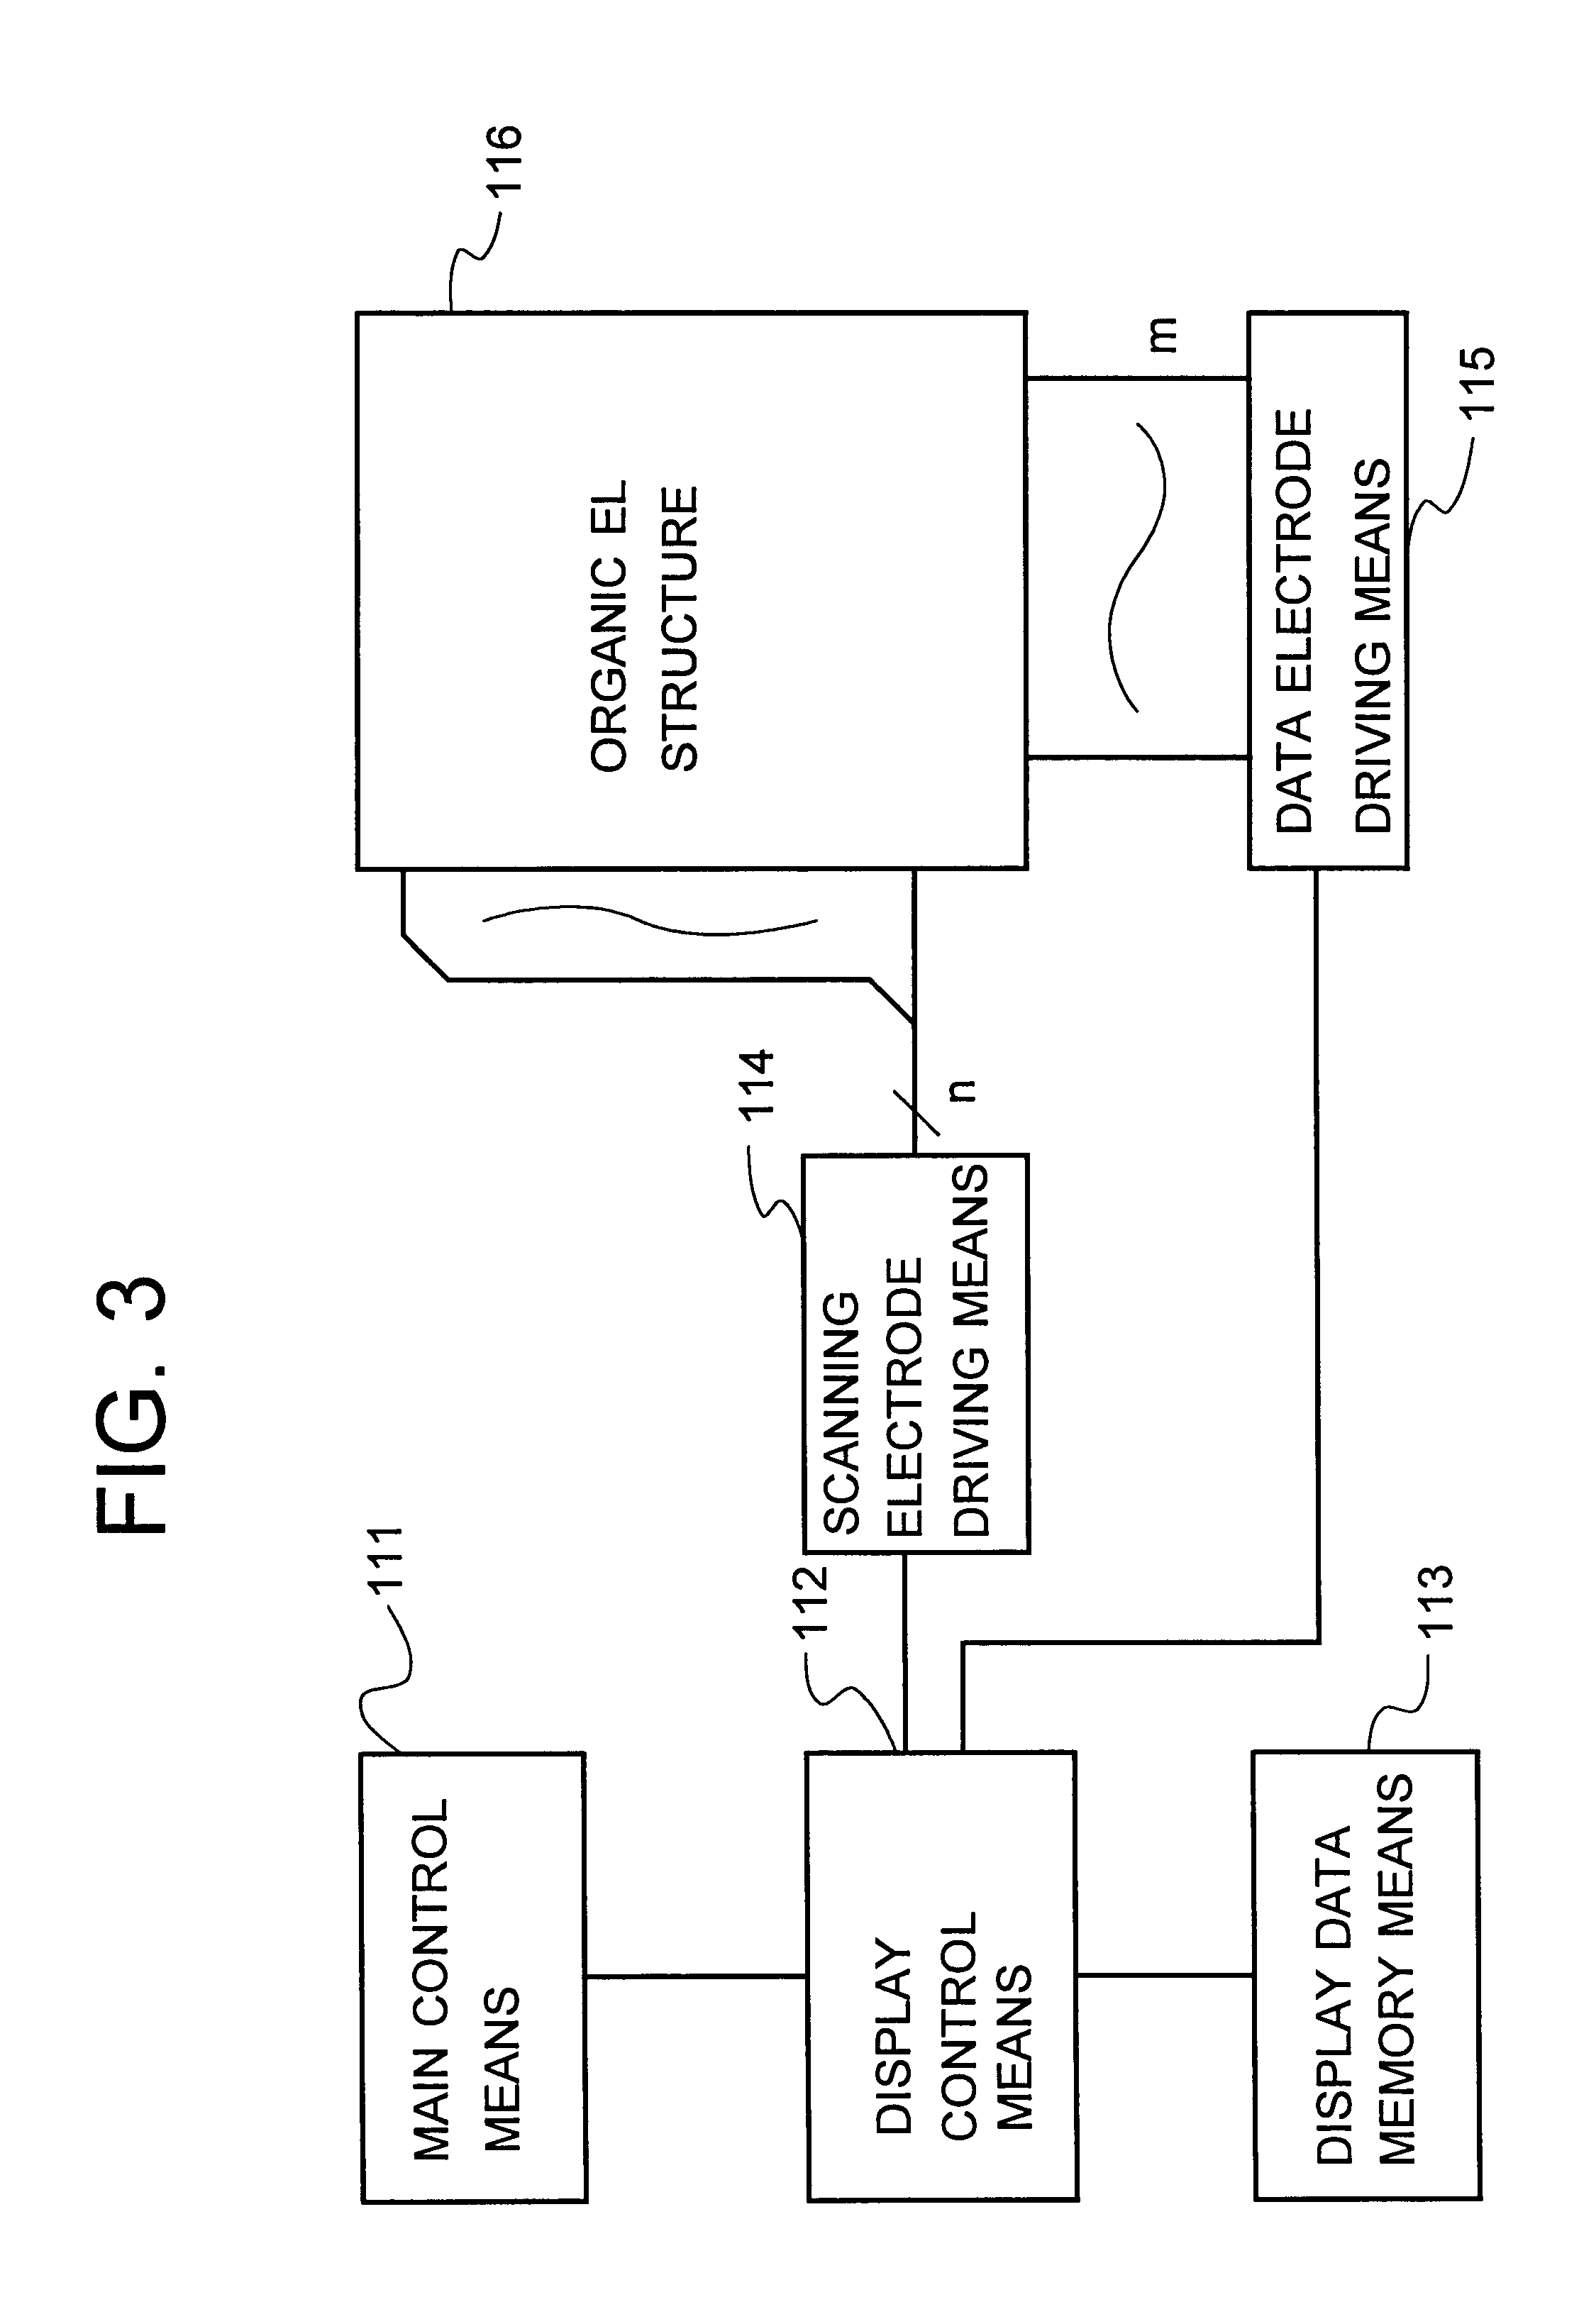 System and method for driving organic EL devices